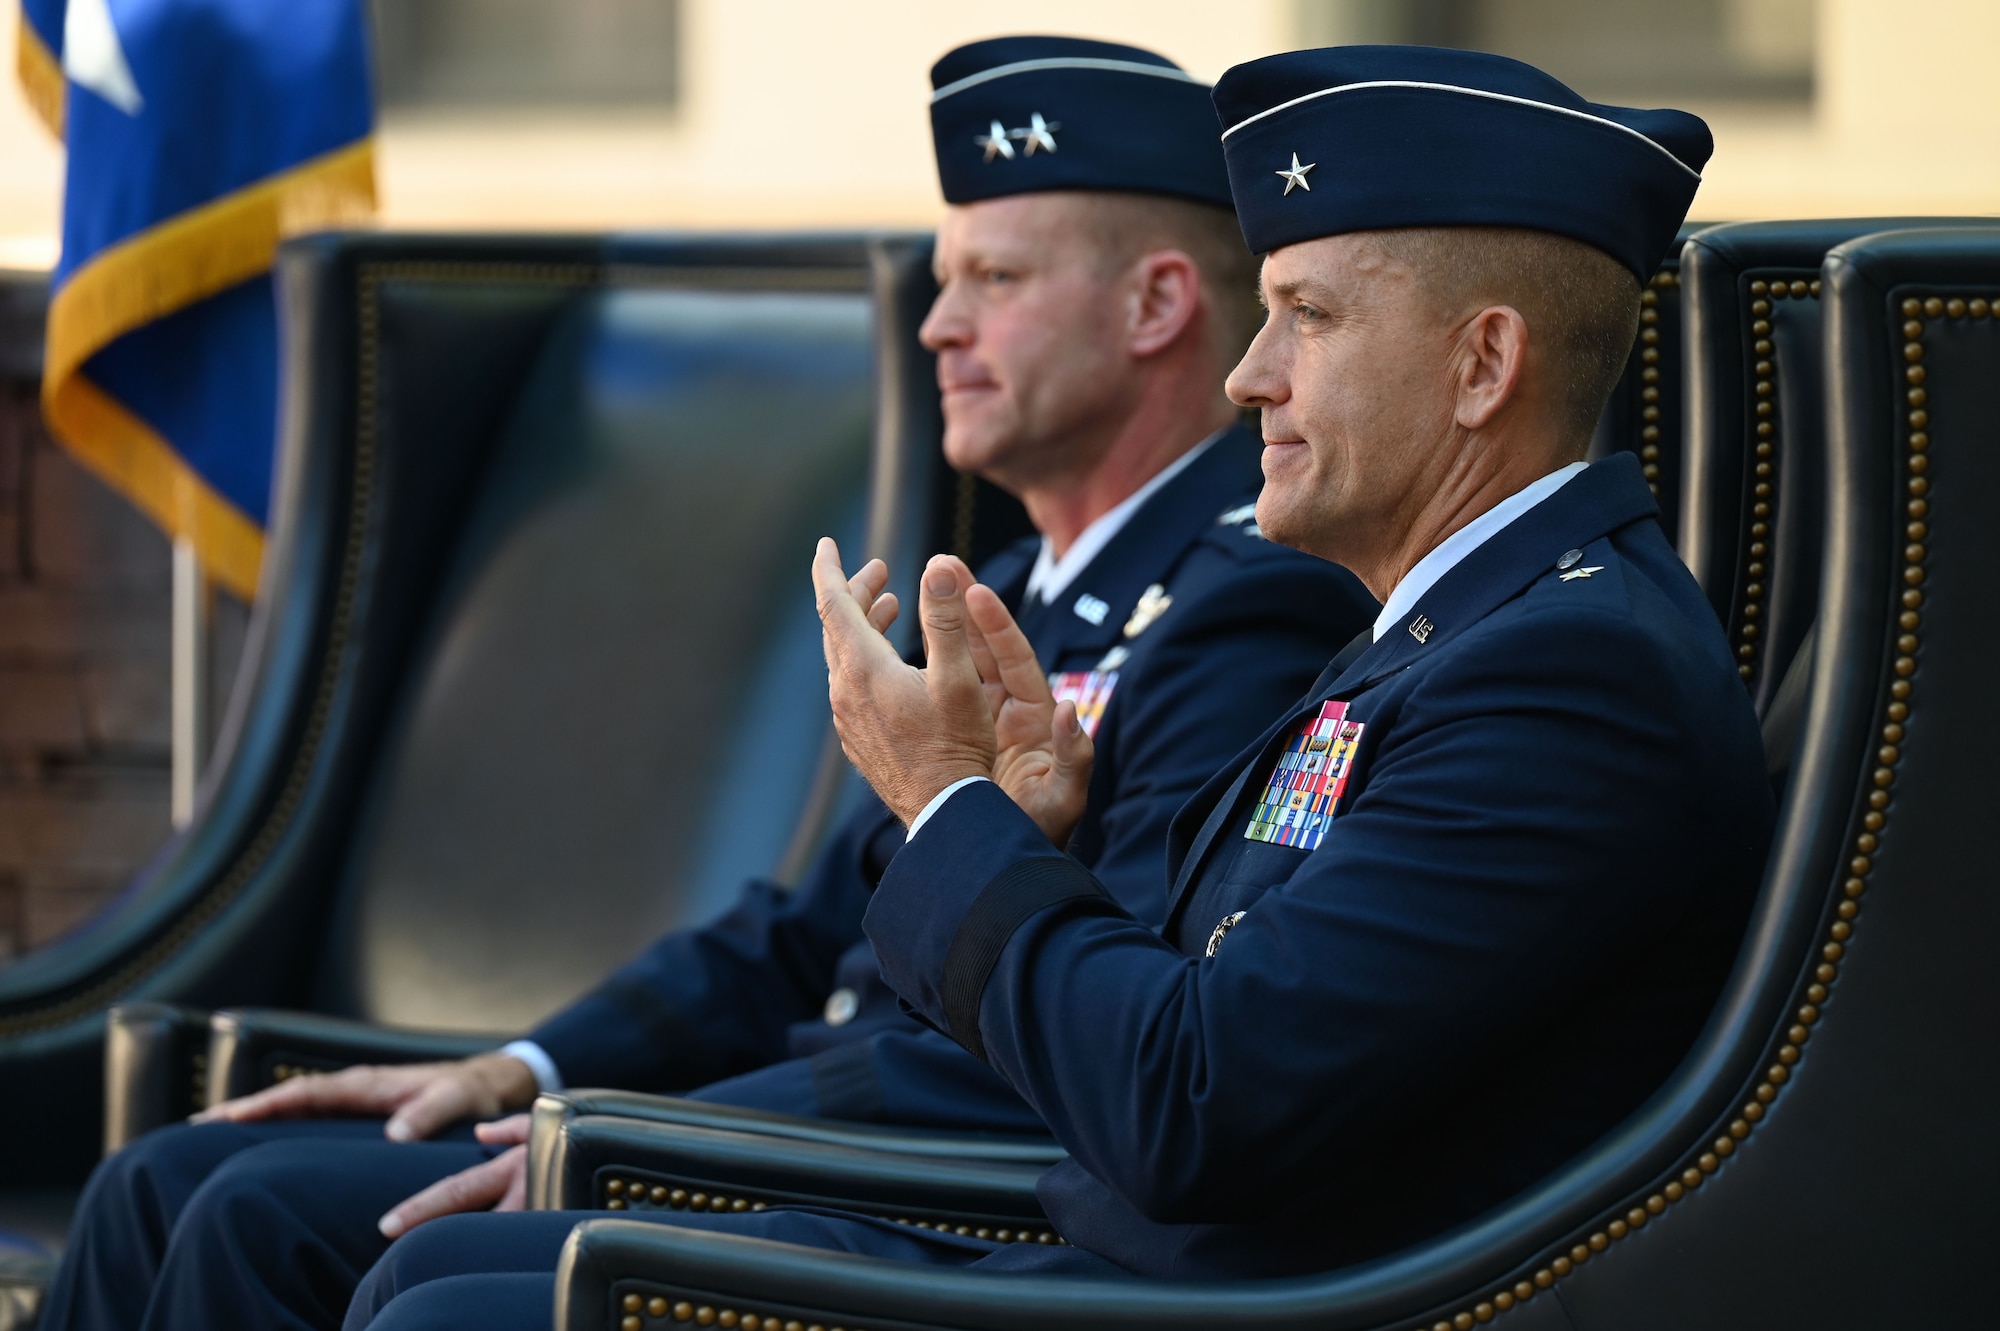 Brig. Gen Michael T. Rawls, Air Force Operational Test and Evaluation Center (AFOTEC) received command from the outgoing commander, Maj. Gen. James R. Sears Jr. during the AFOTEC change of command ceremony at Kirtland Air Force Base, N.M., July 19, 2022. Rawls  (U.S. Air Force photo by Airman 1st Class Karissa Dick)